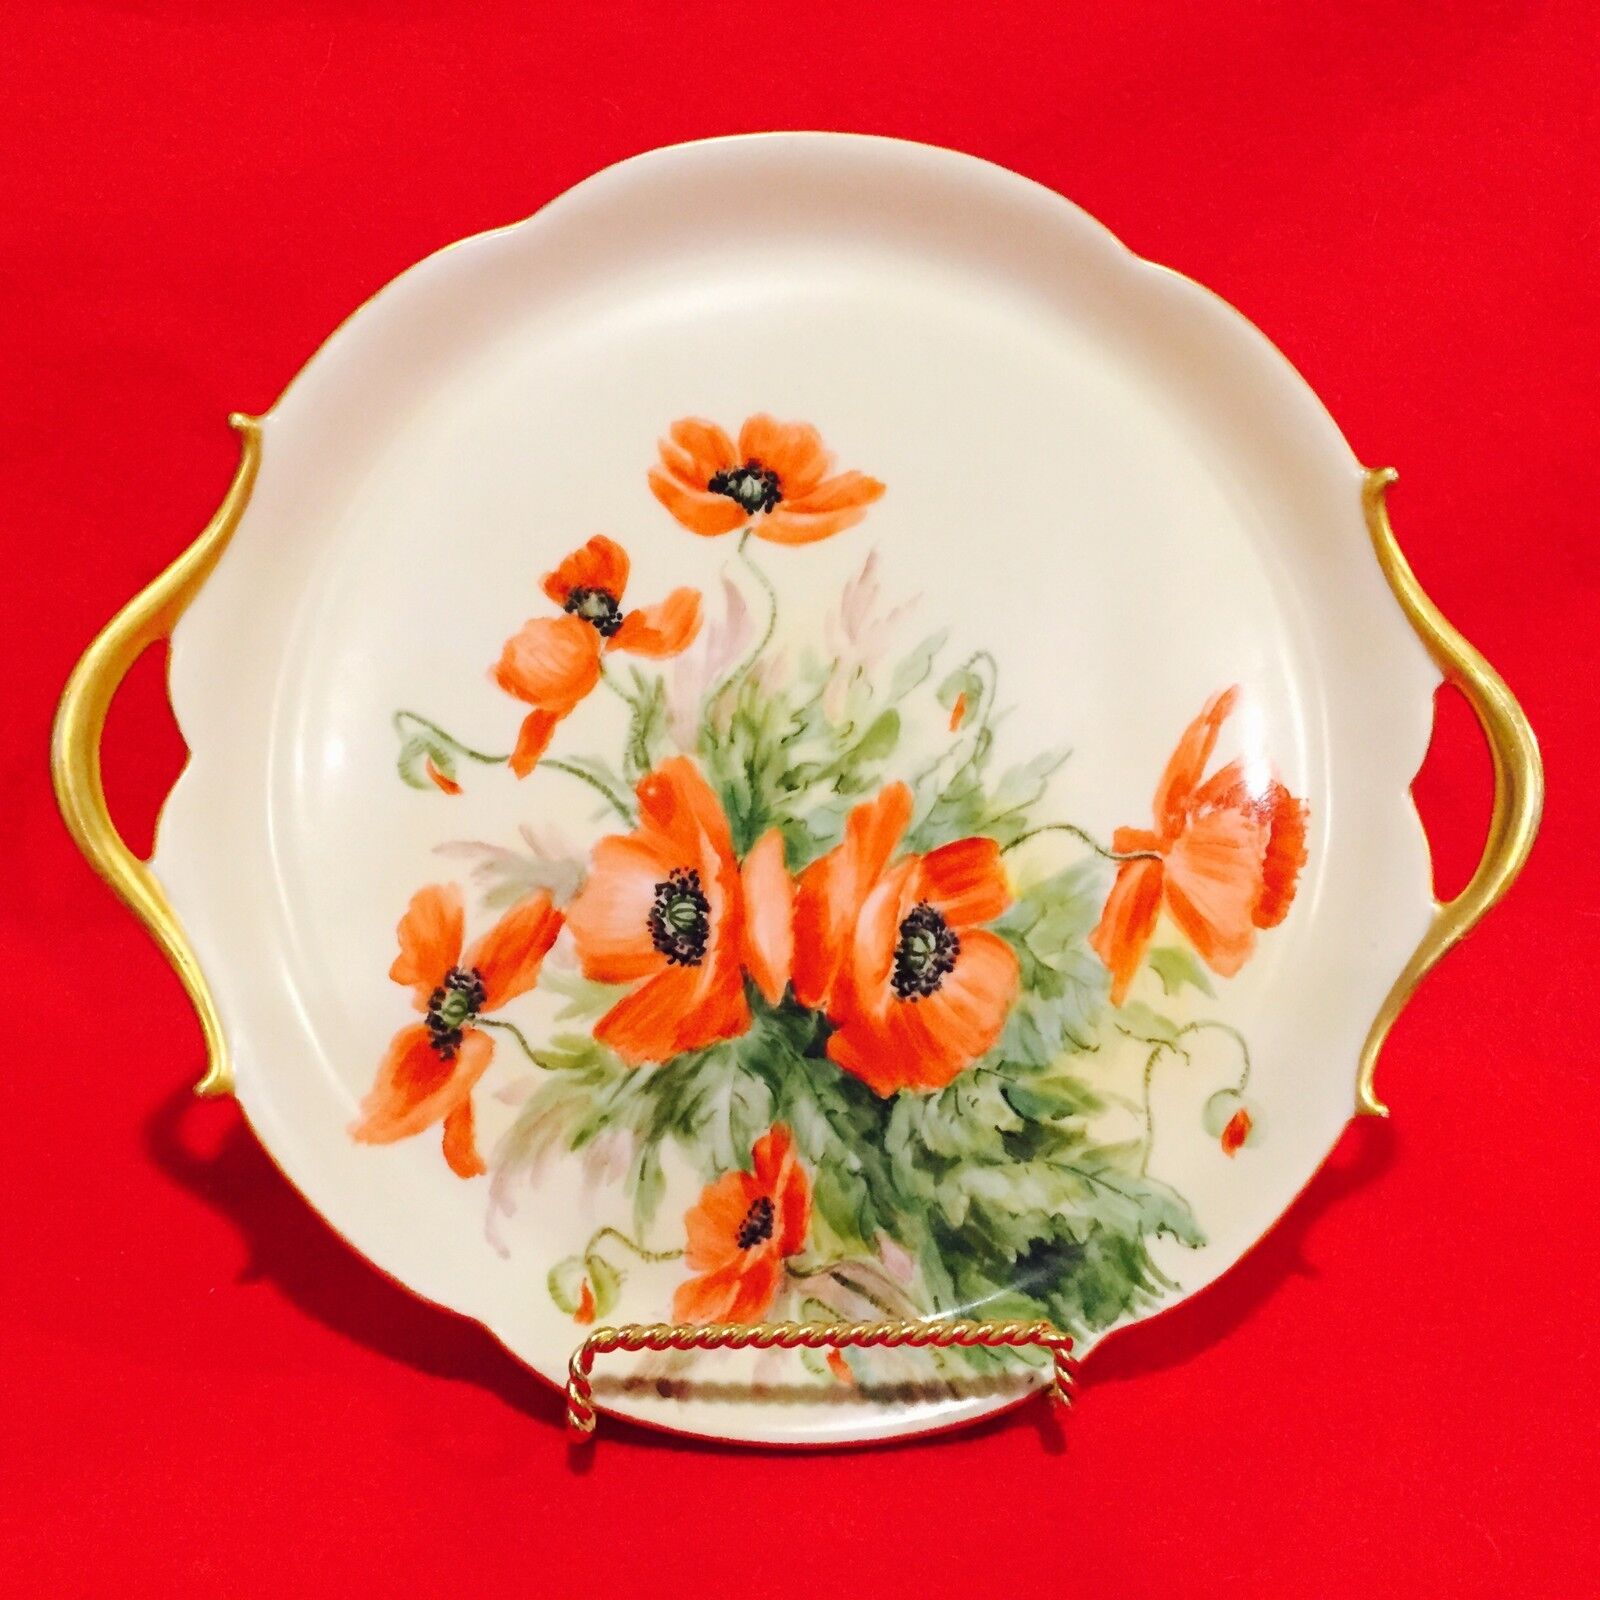 GORGEOUS TRESSEMAN & VOGT (T&V) LIMOGES HAND PAINTED TRAY PLATTER WITH POPPIES